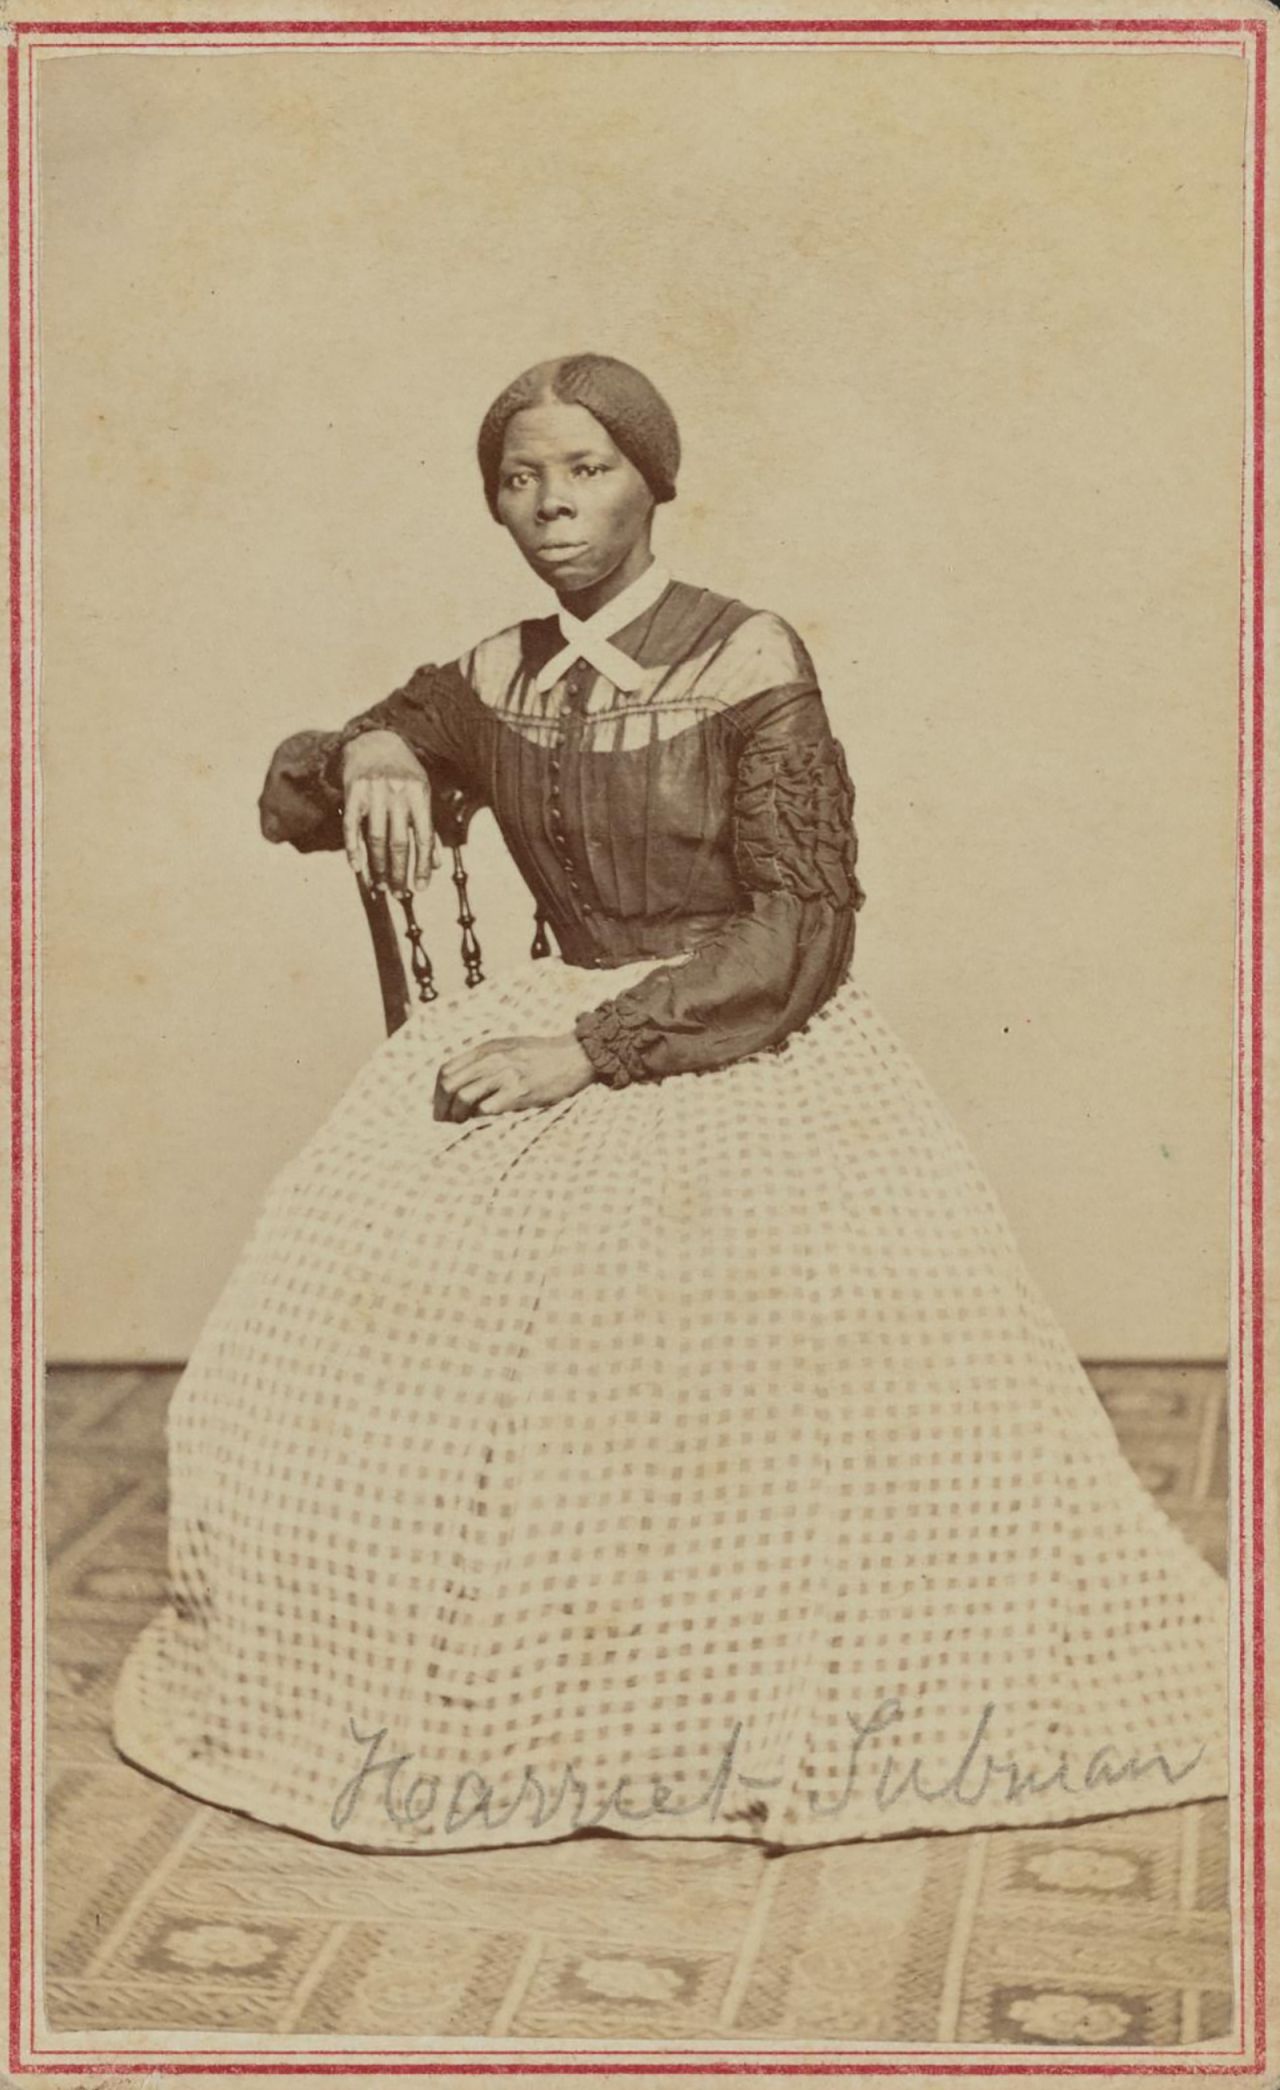 A portrait of Harriet Tubman, who rescued enslaved people during the American Civil War.